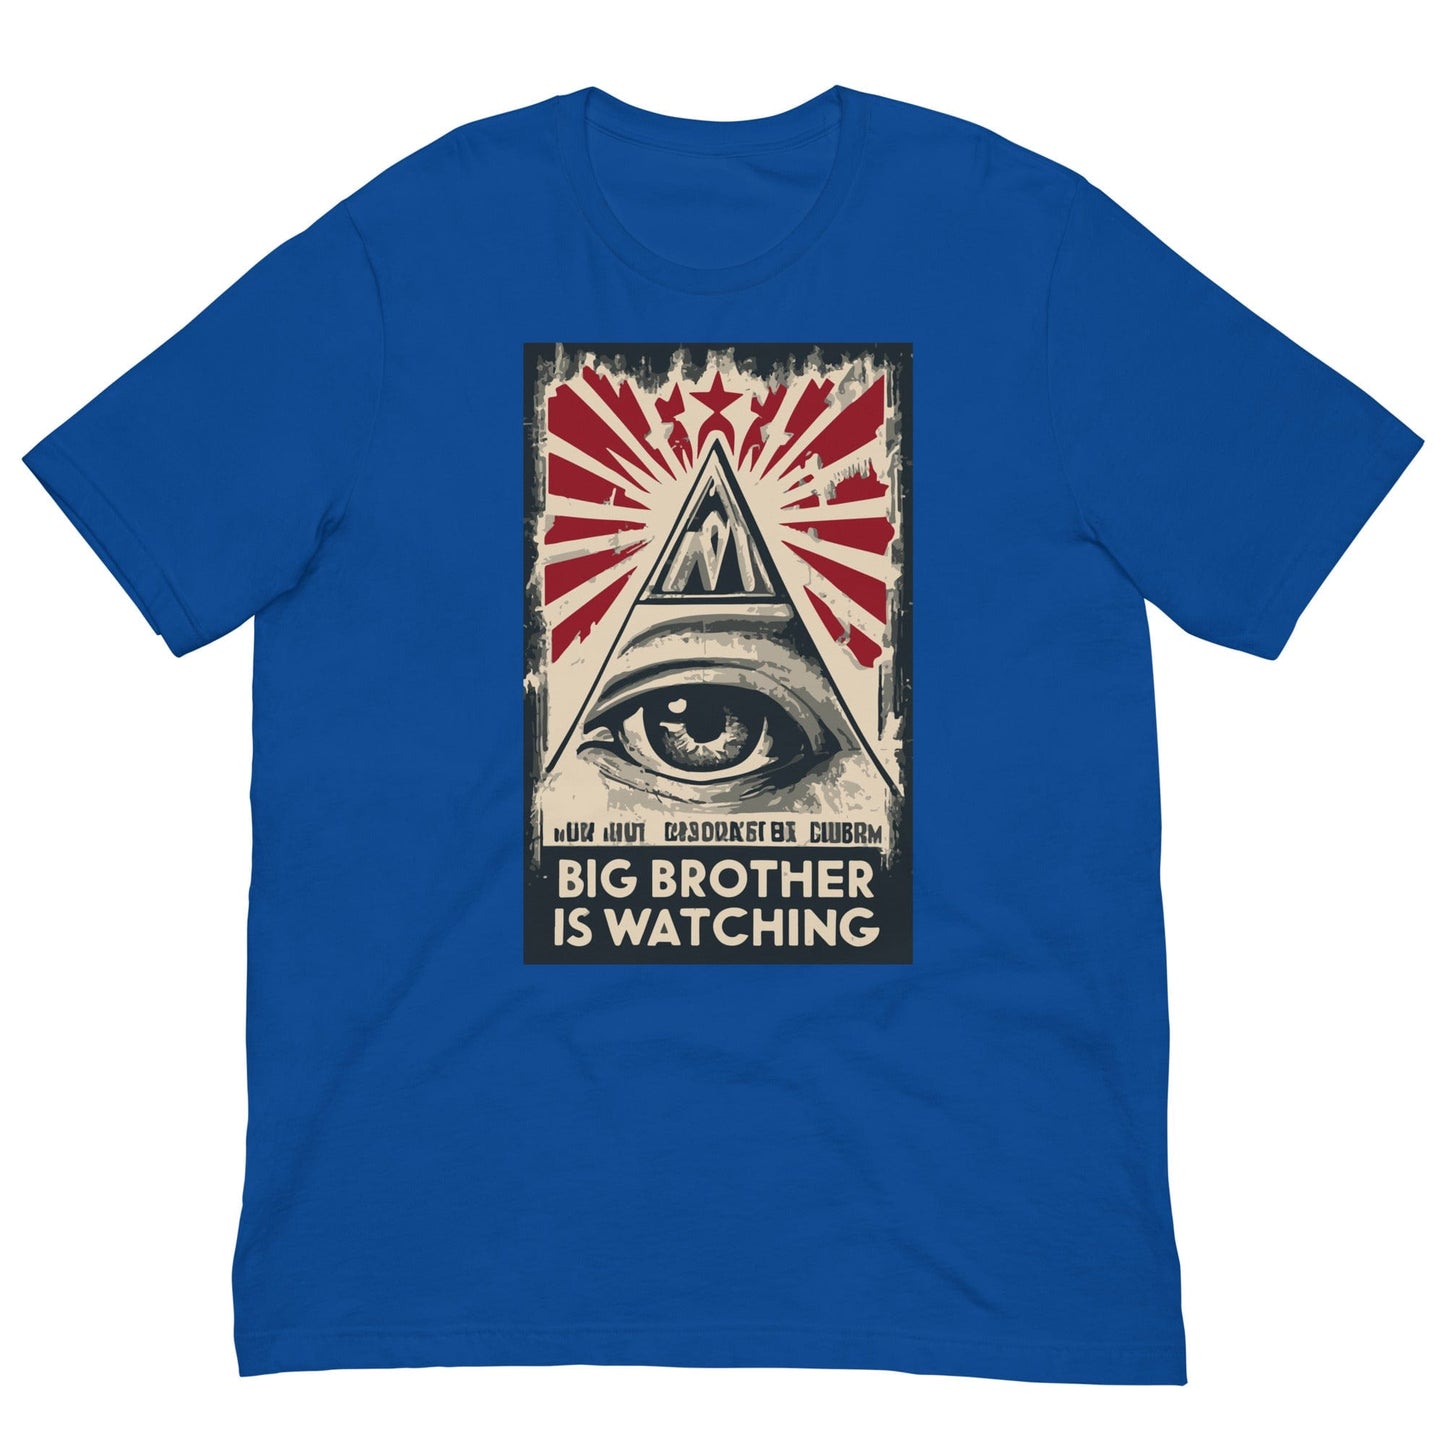 Big Brother is watching T-shirt True Royal / S